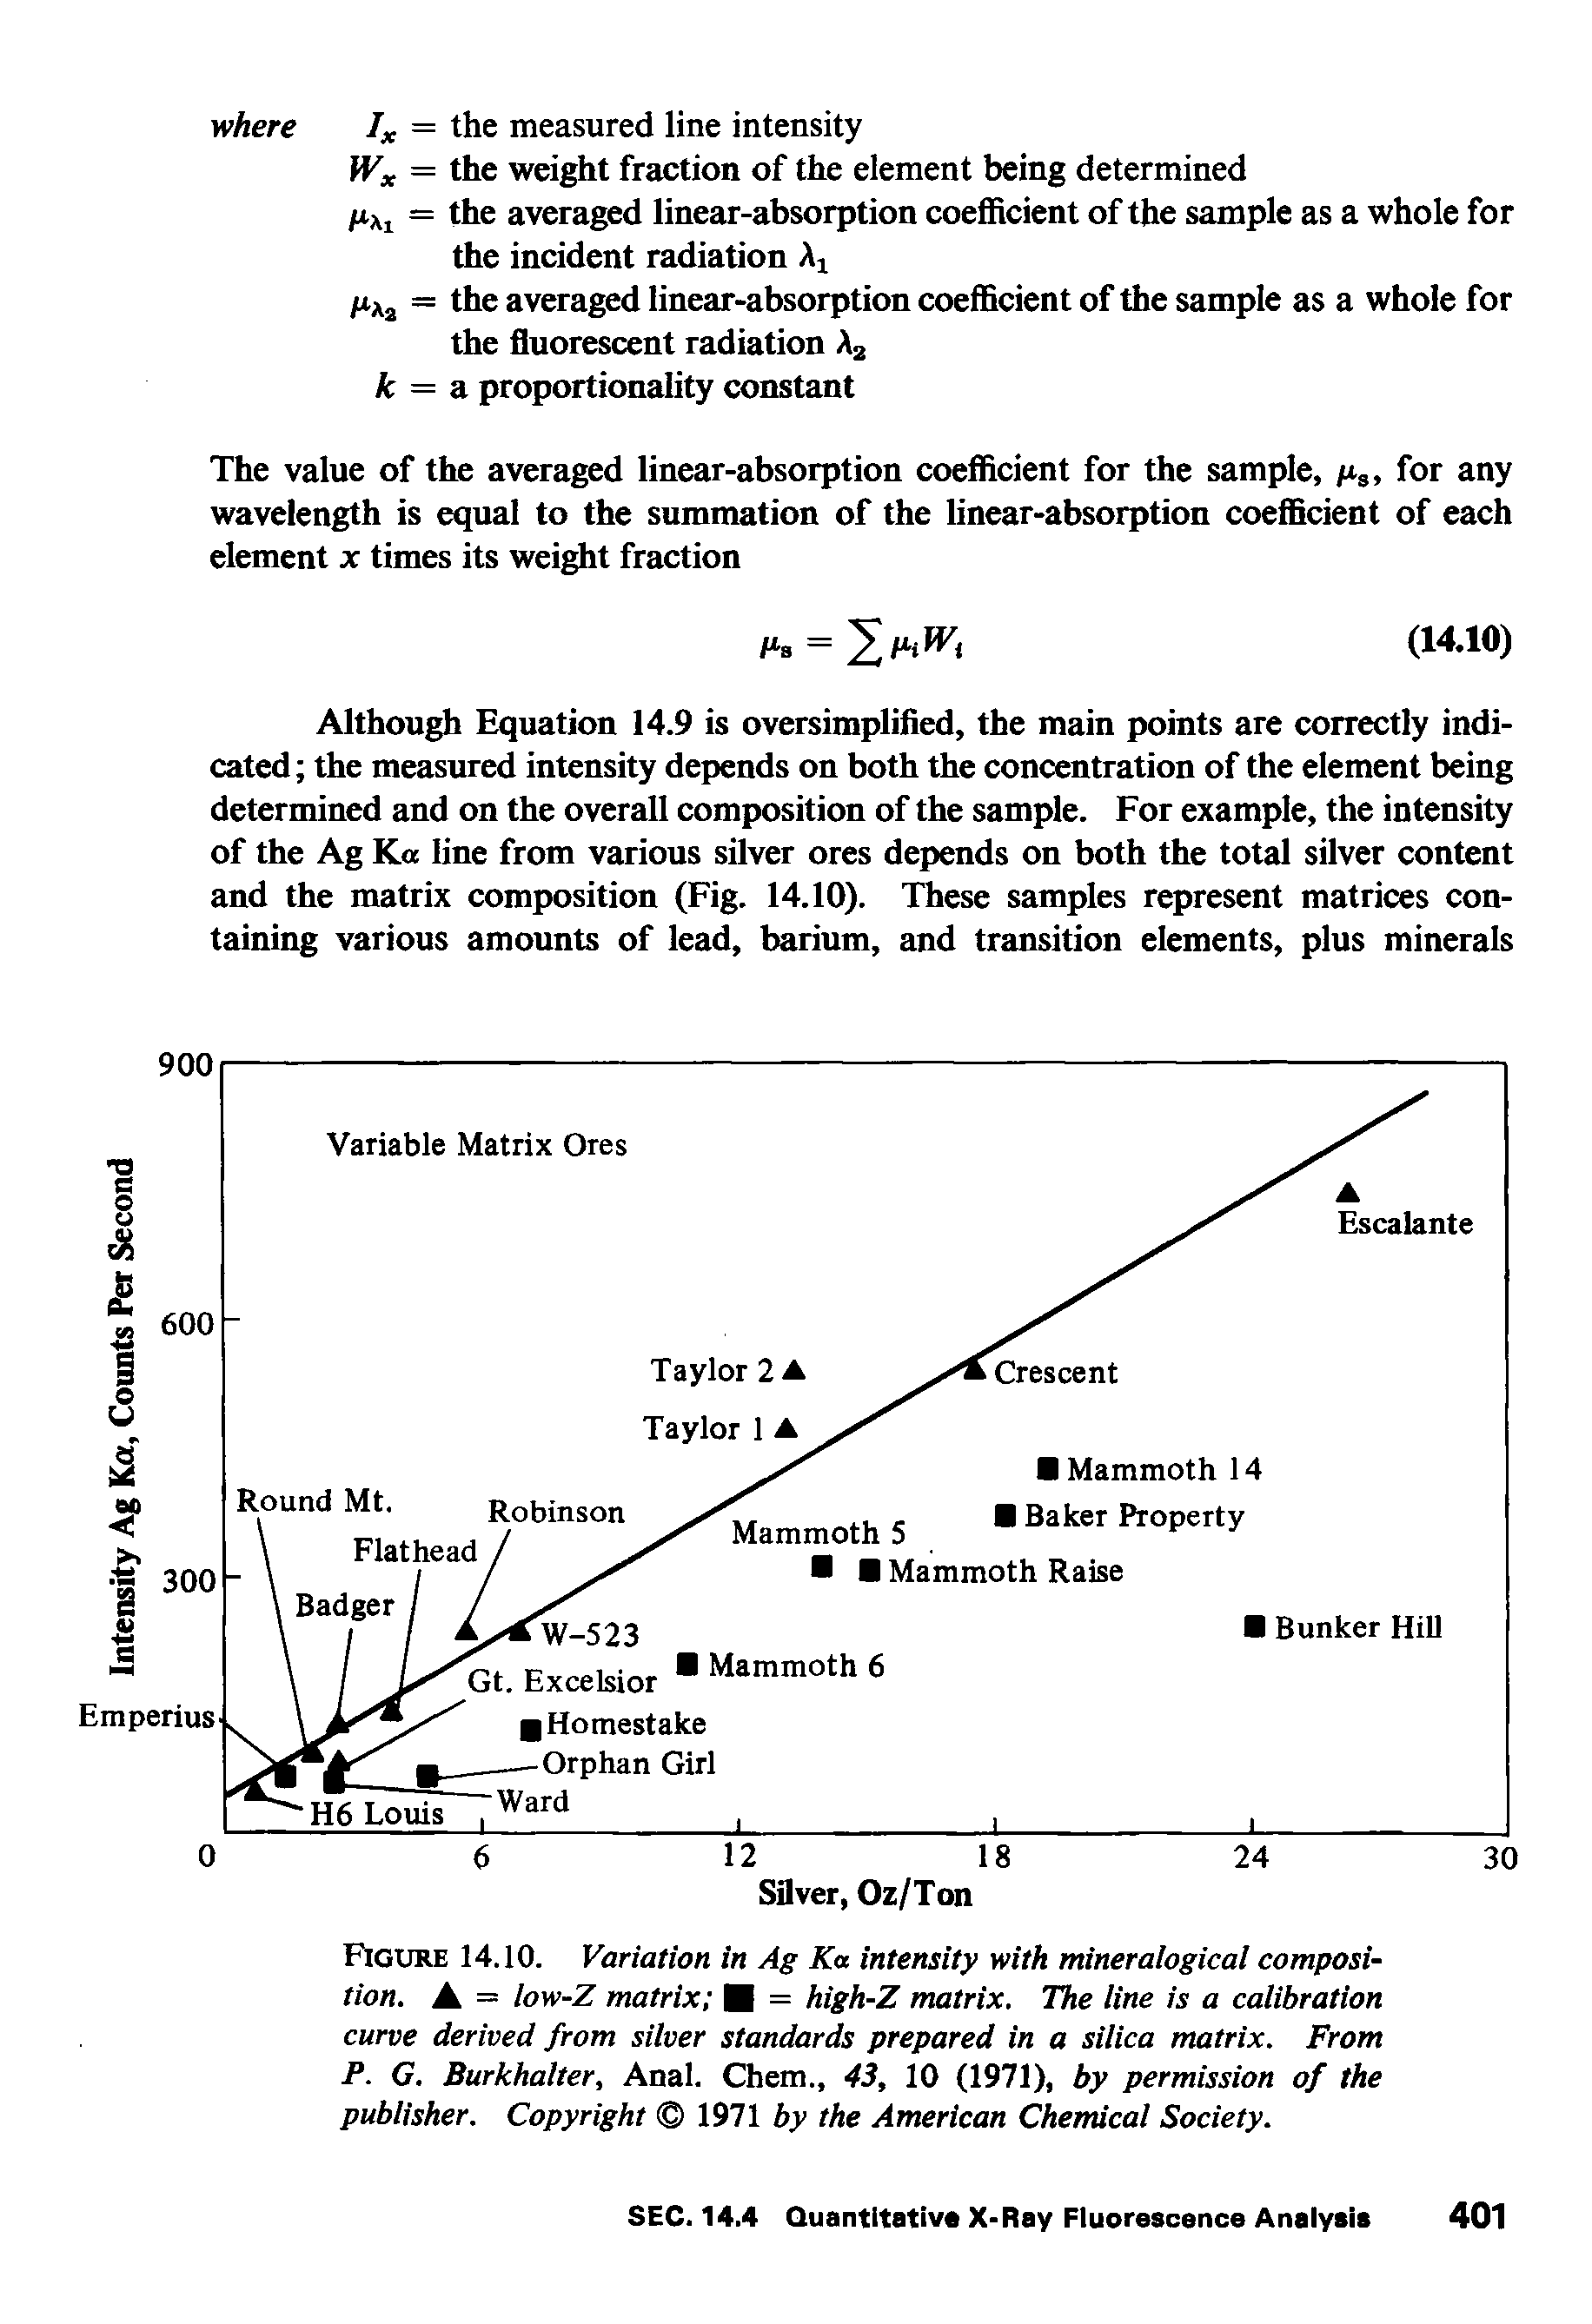 Figure 14.10. Variation in Ag Ka intensity with mineralogical composition. A = low-Z matrix = high-Z matrix. The line is a calibration curve derived from silver standards prepared in a silica matrix. From P. G. Burkhalter, Anal. Chem., 43, 10 (1971), by permission of the publisher. Copyright 1971 by the American Chemical Society.